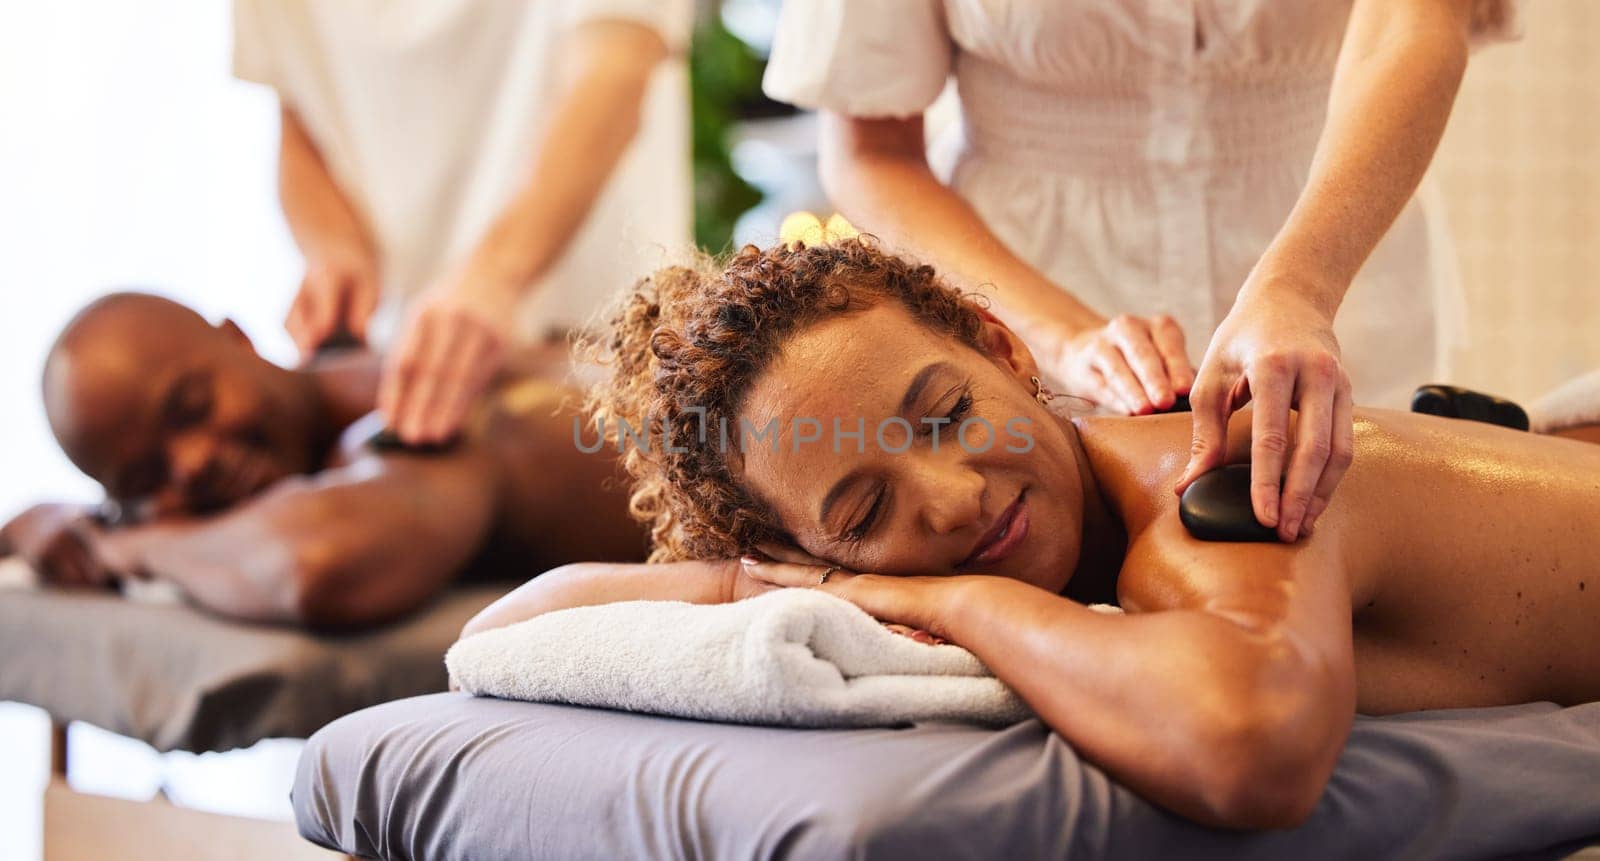 Spa, wellness and massage for couple and hot stone therapy, massage therapist hands for stress relief and body health. Man and woman relax with luxury service at beauty salon, peace and detox release.